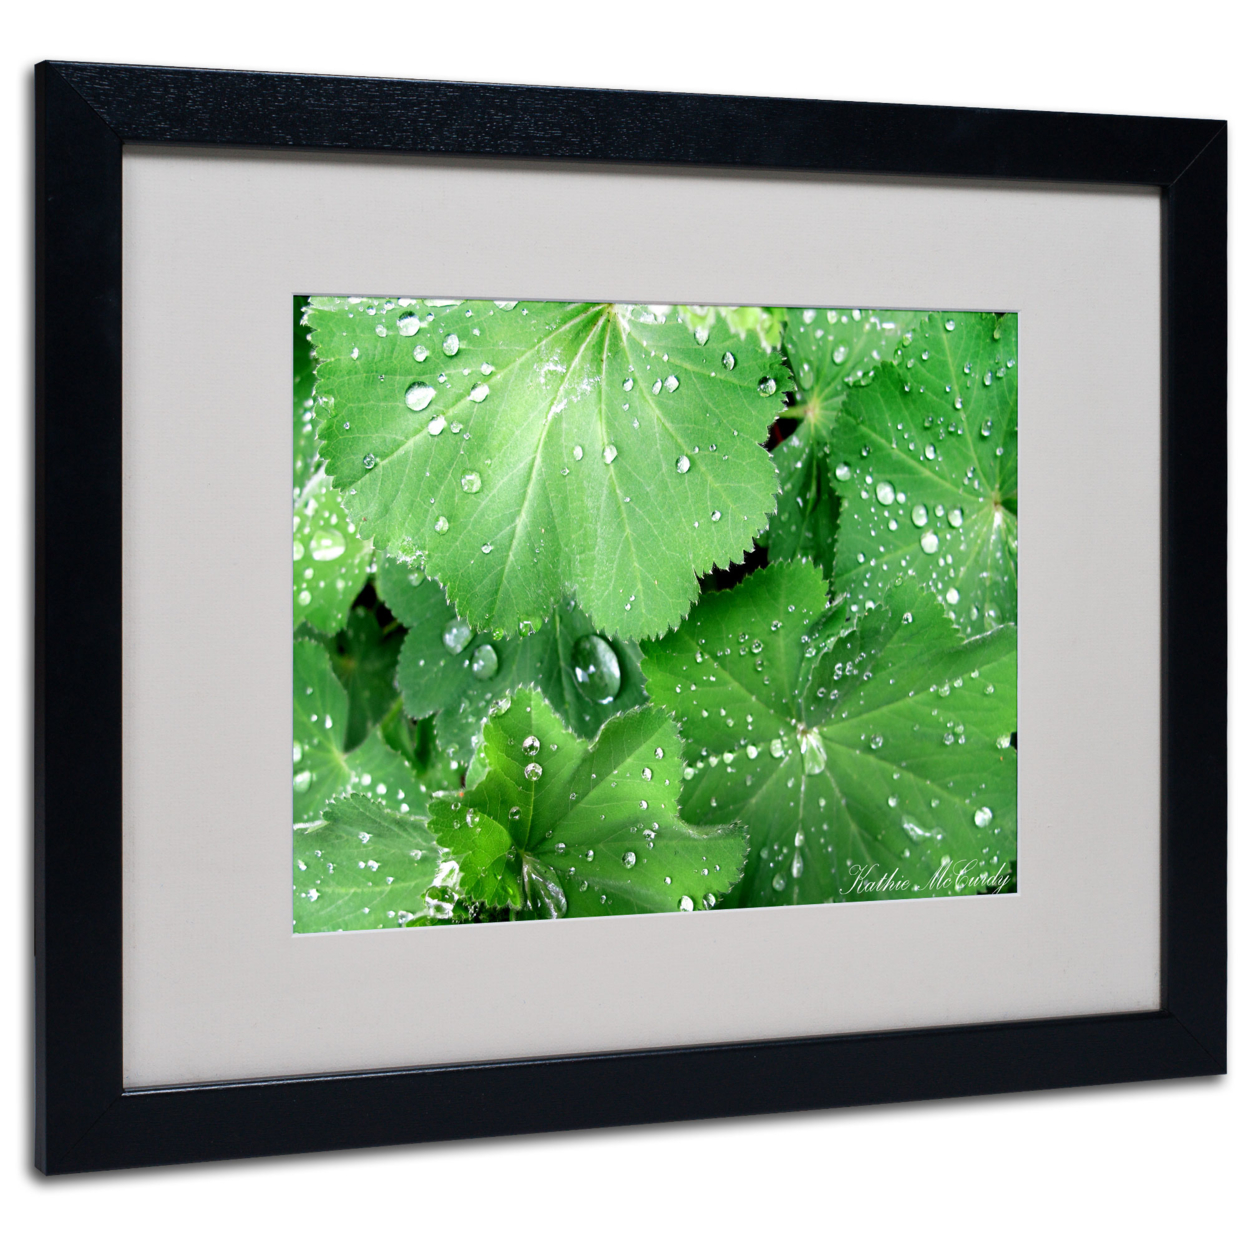 Kathie McCurdy 'Water Droplets' Black Wooden Framed Art 18 X 22 Inches